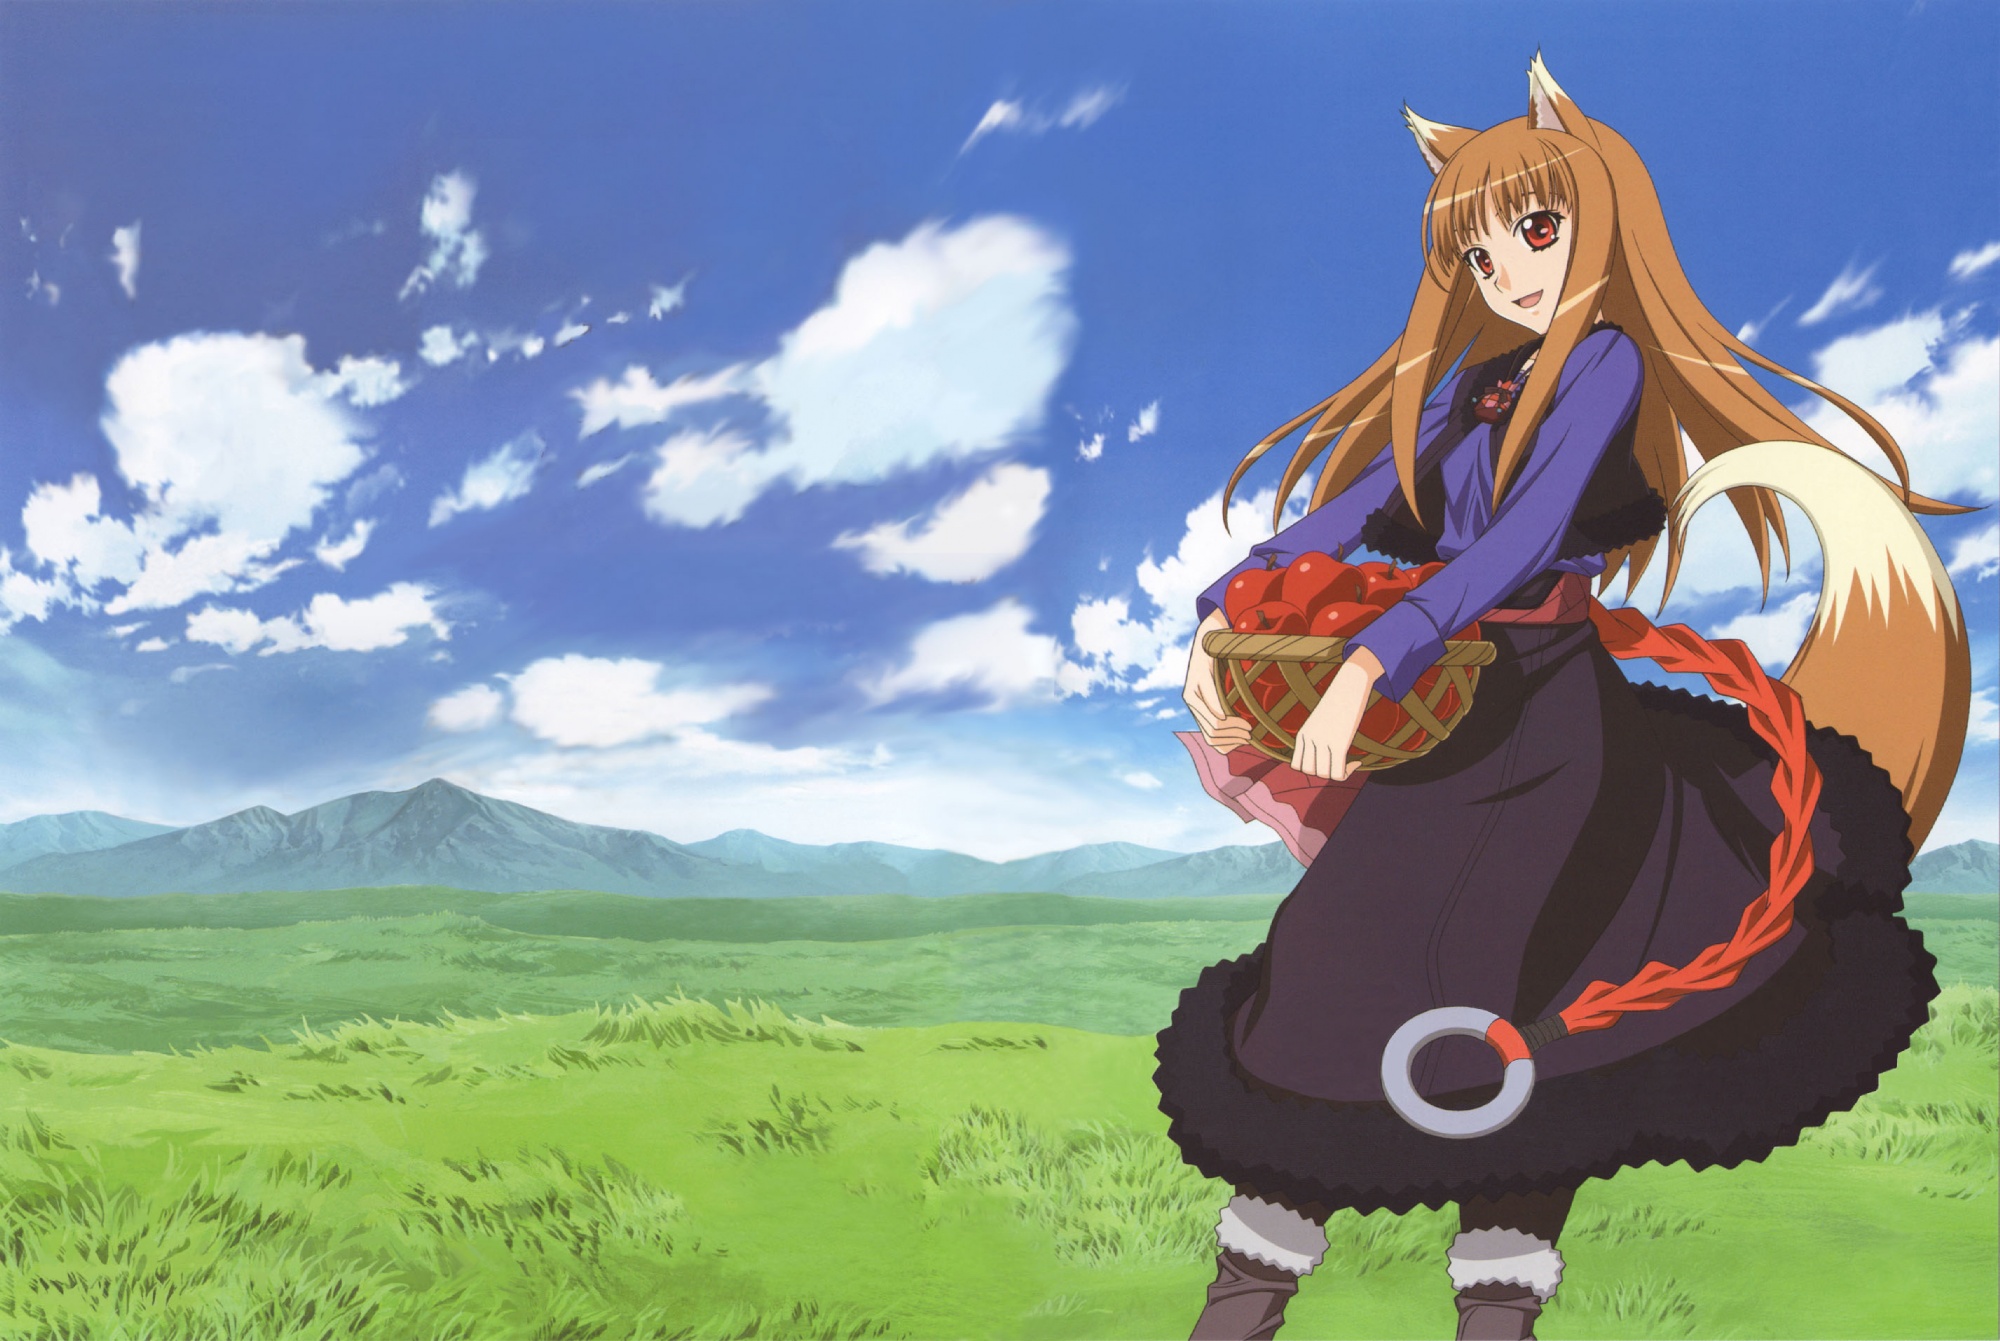 Smiling Holo from Spice & Wolf eating an apple under a cloudy sky with her tail and animal ears.